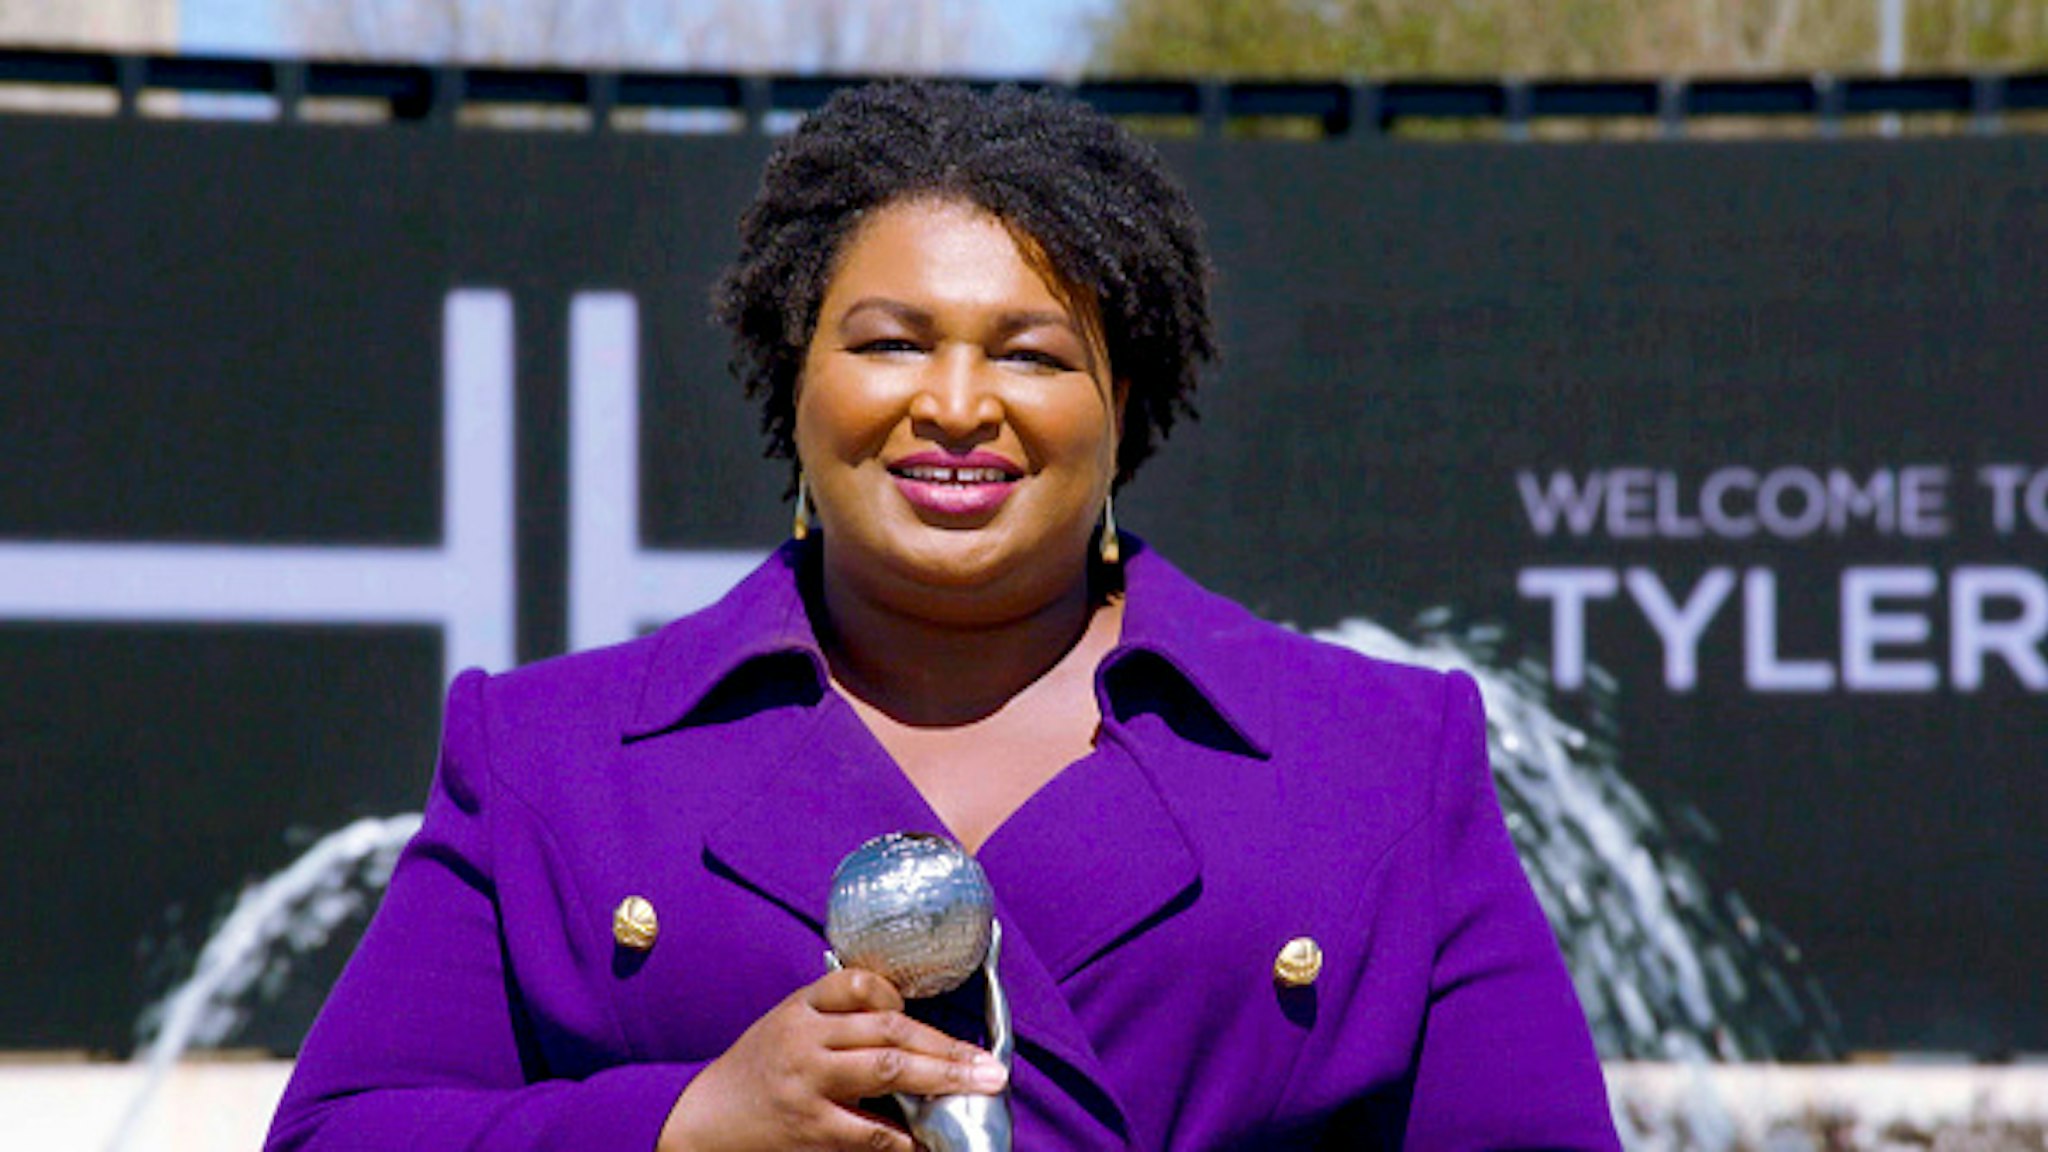 UNSPECIFIED - MARCH 27: In this screengrab, Stacey Abrams accepts the Social Justice Impact Award during the 52nd NAACP Image Awards on March 27, 2021.